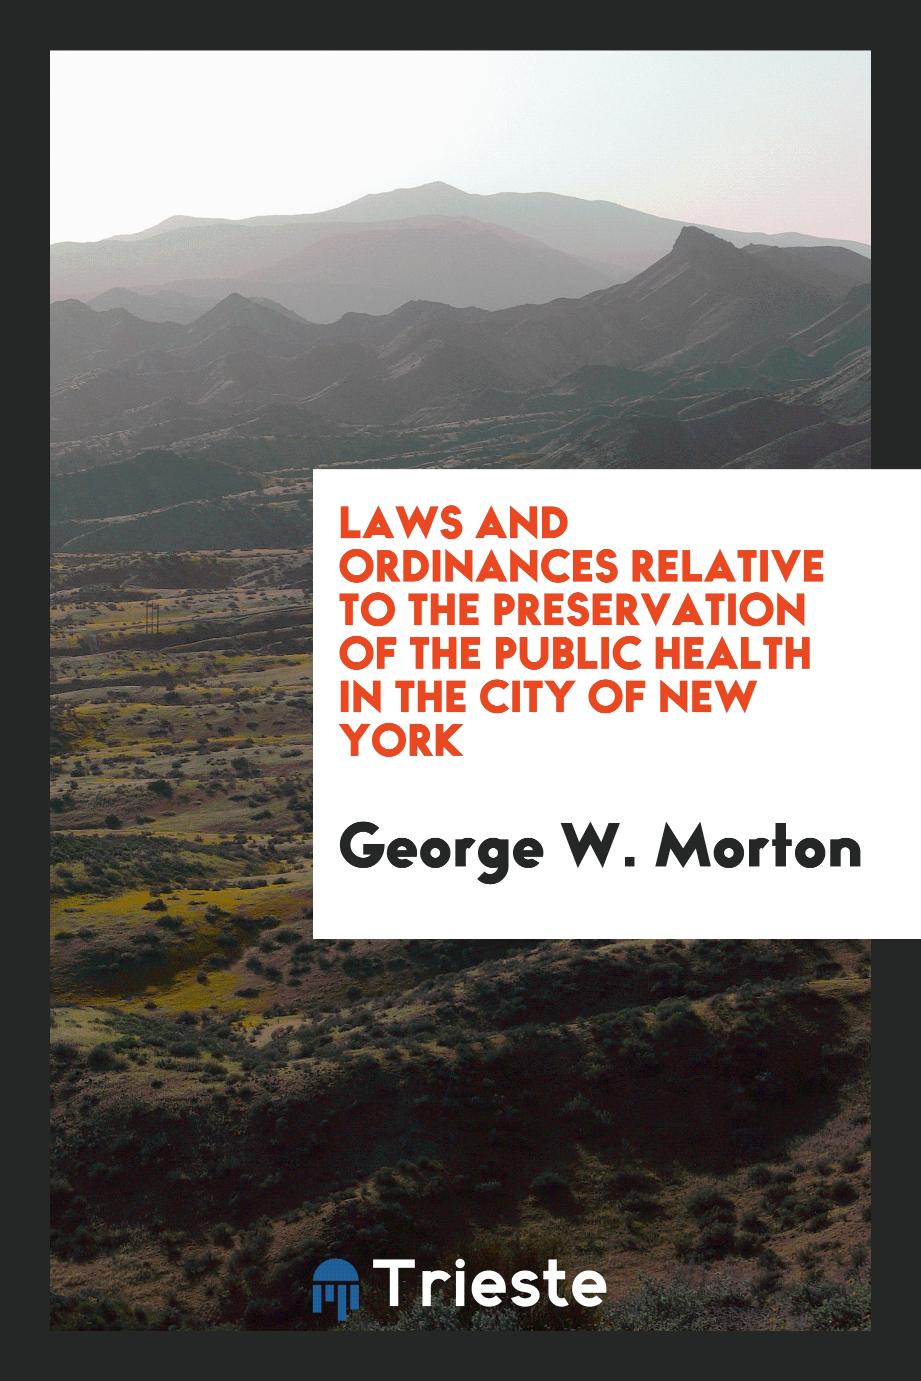 Laws and Ordinances Relative to the Preservation of the Public Health in the City of New York